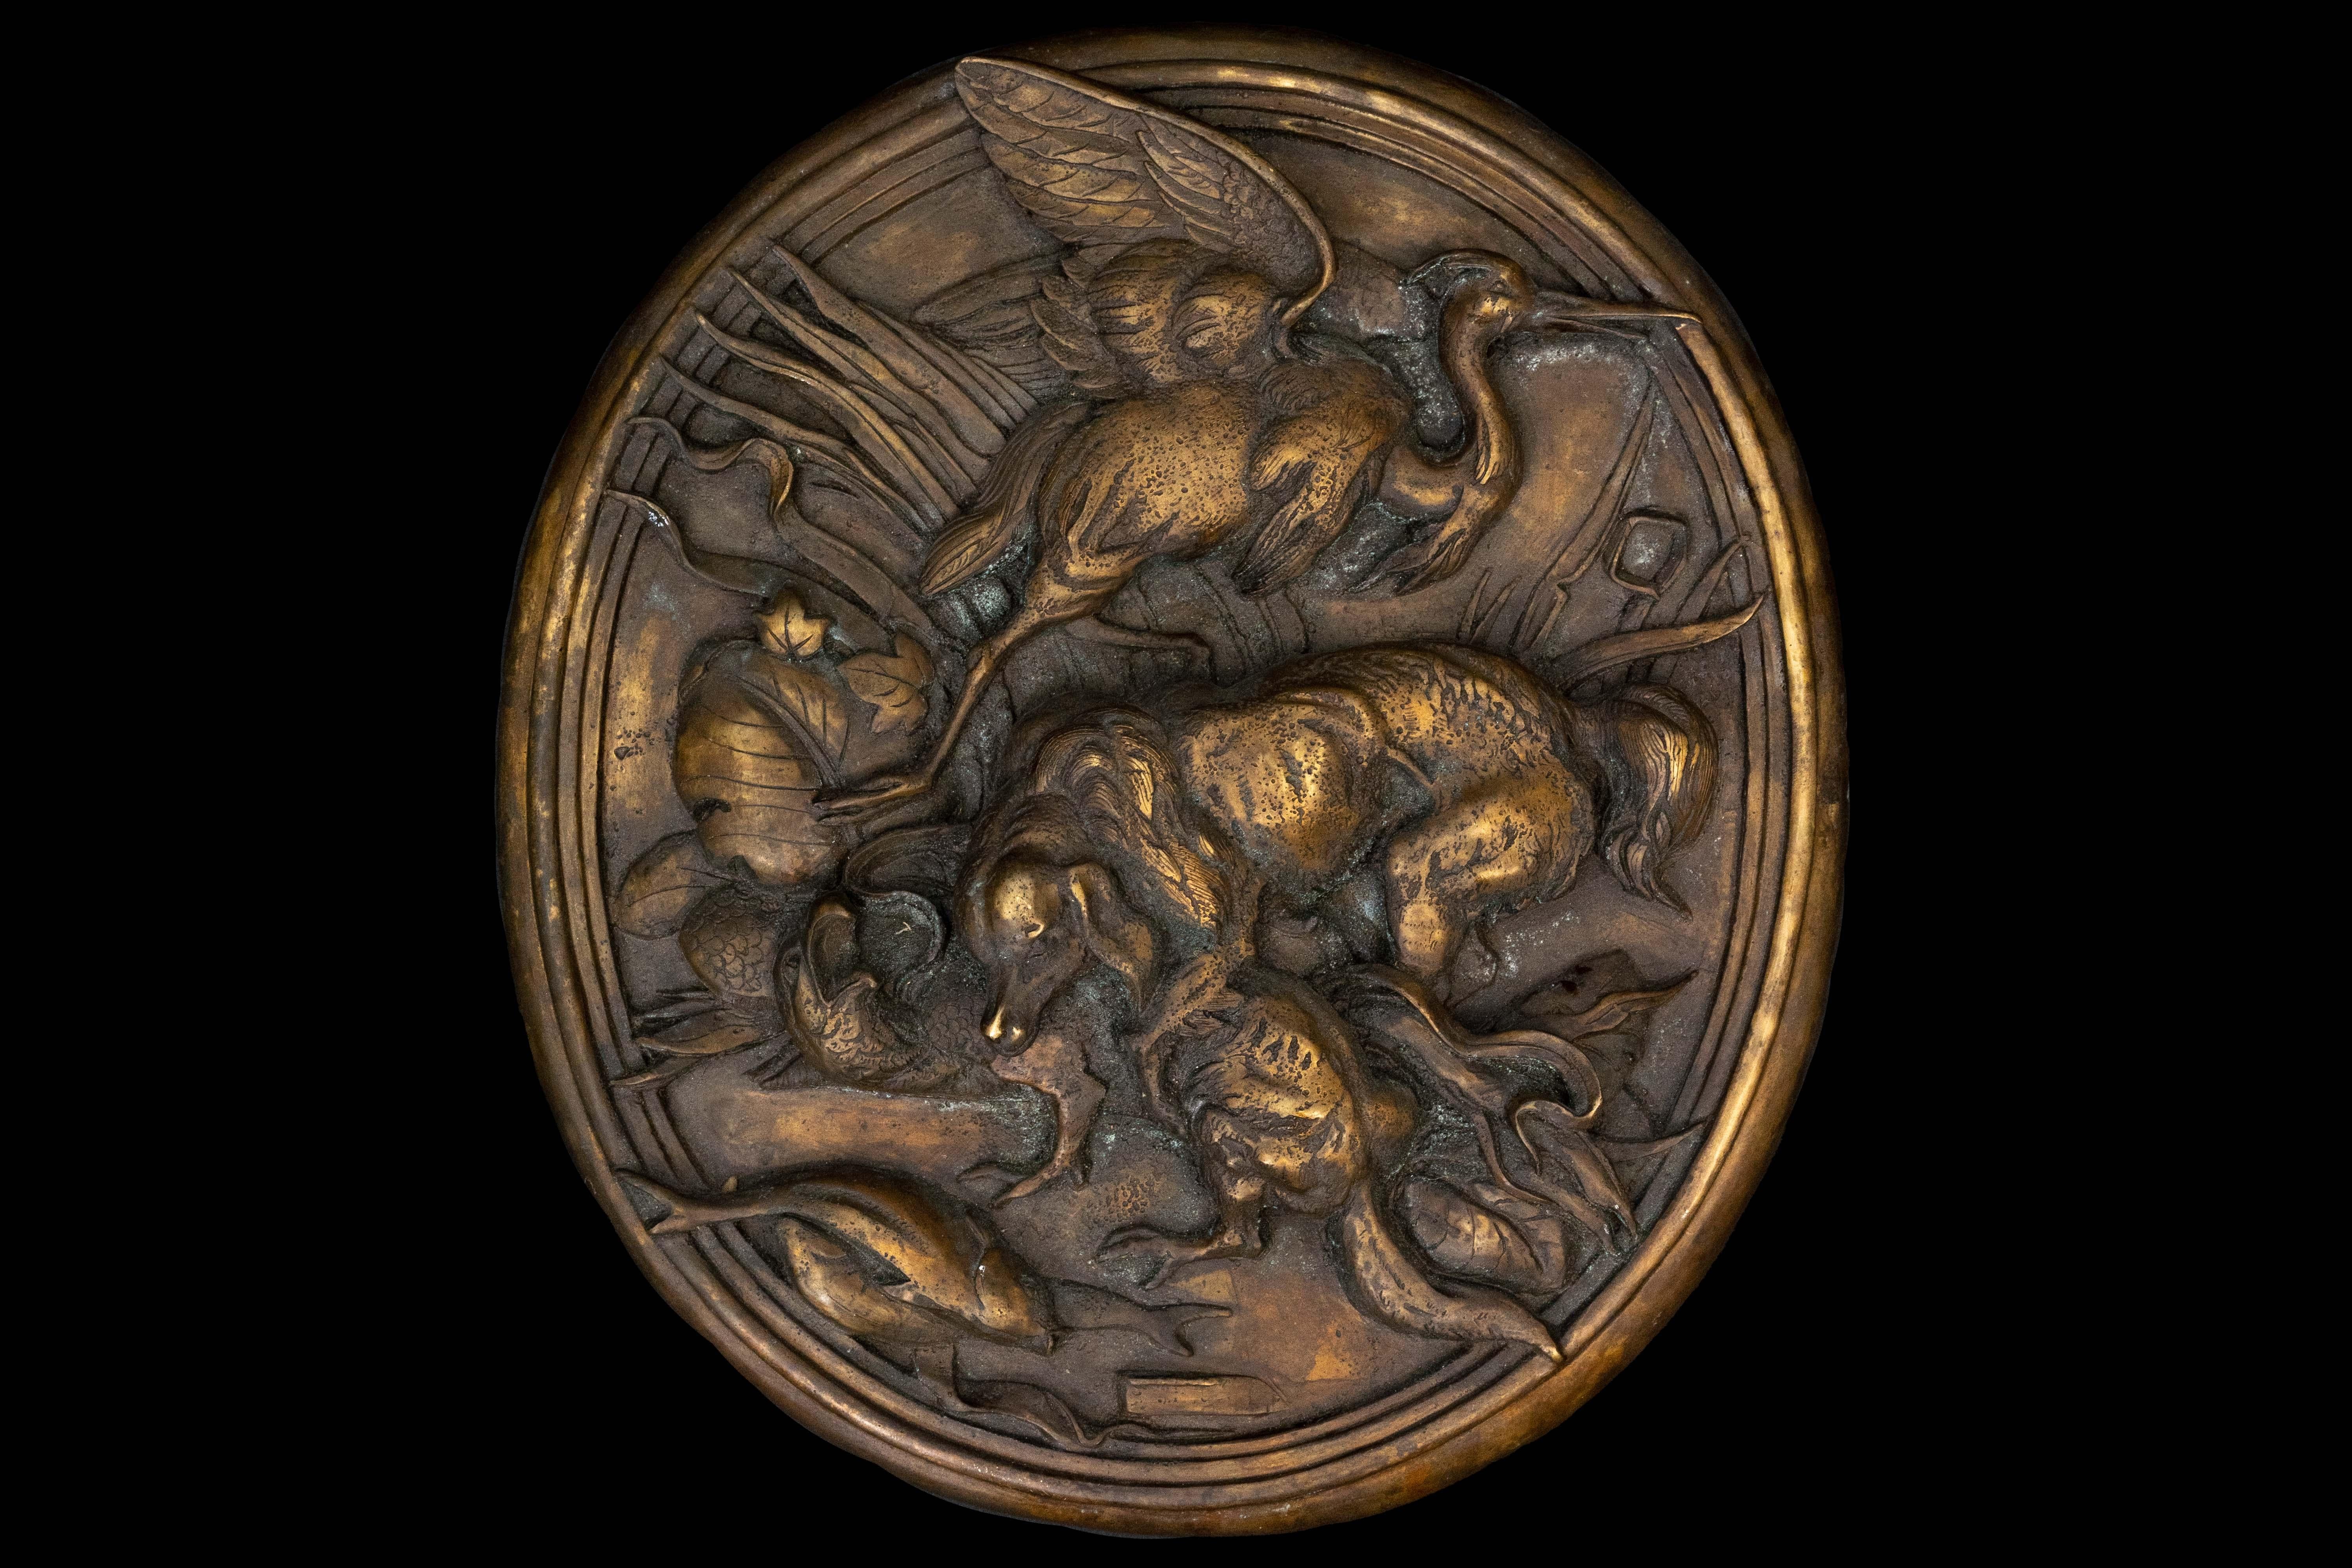 19th century bronze hunting plaque

Measures approximately: 16